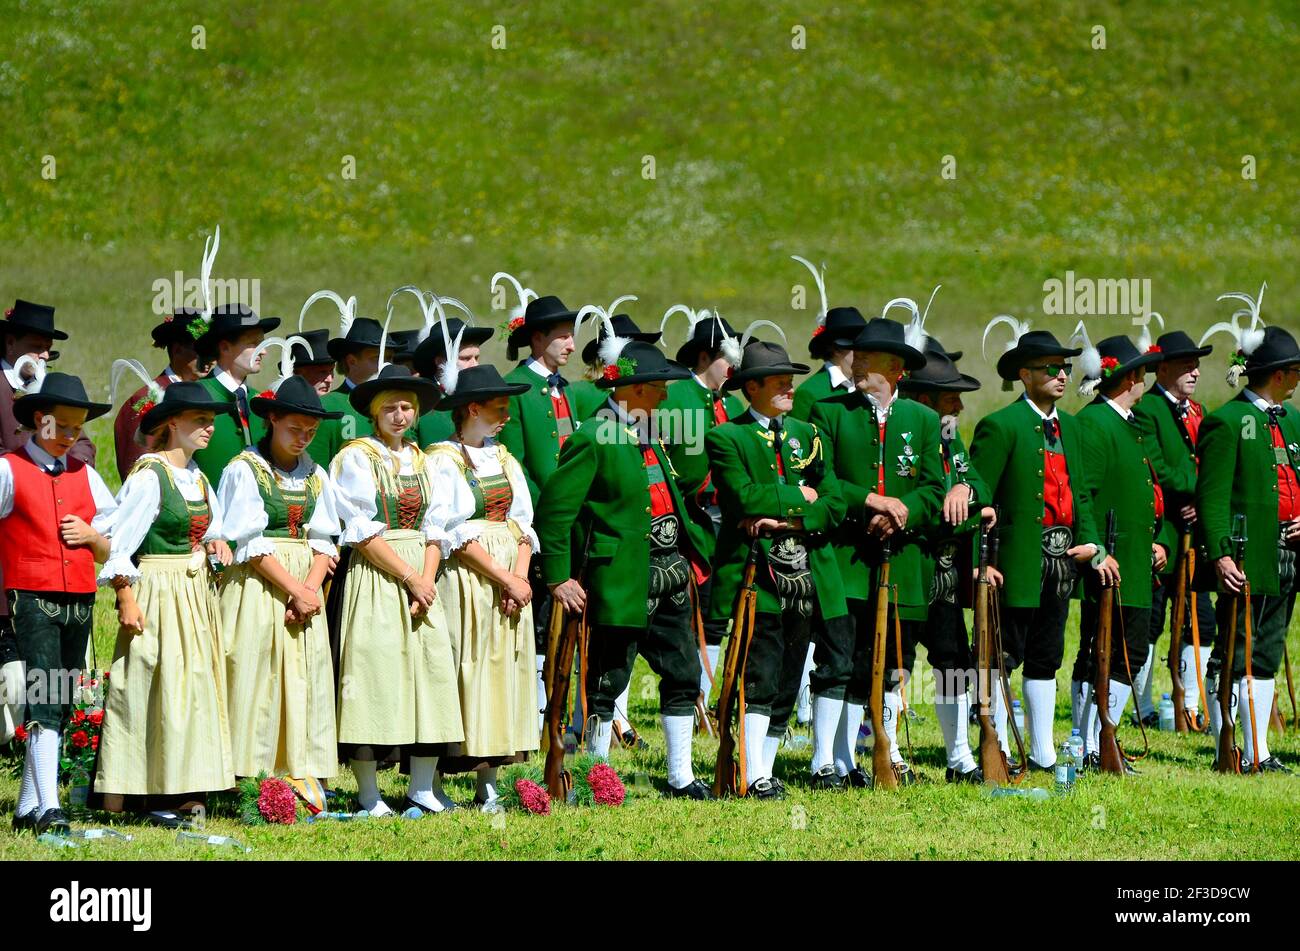 Feichten, Tyrol, Austria - June 22, 2014: Unidentified folklore group, Tyrolean gun men in traditional outfit and weapons by field mass in Kaunertal v Stock Photo